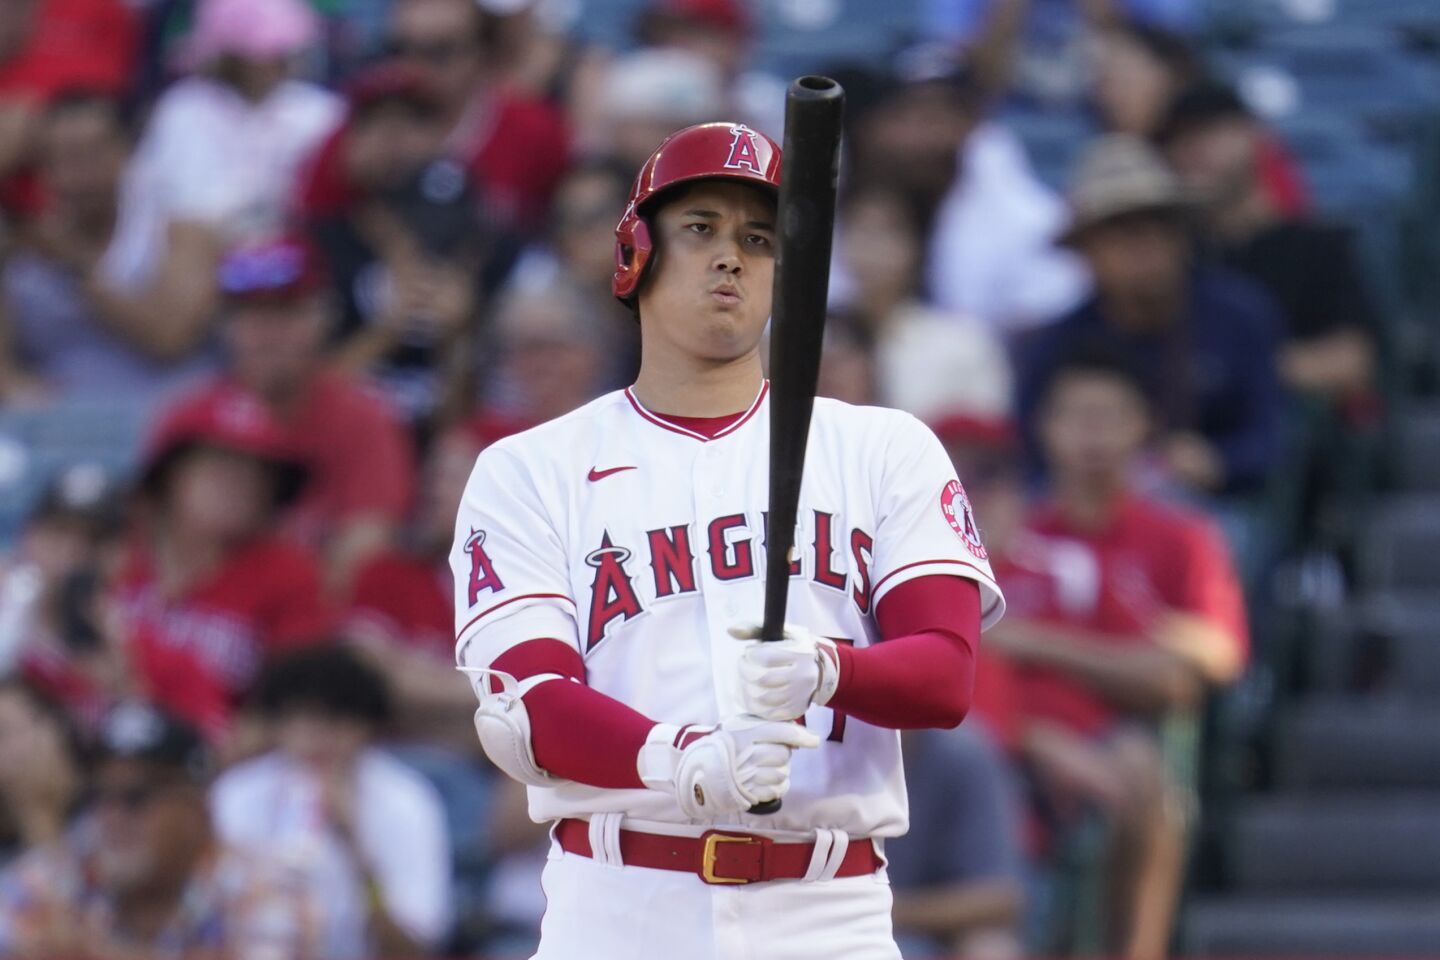 20 | Los Angeles Angels (73-86; LW: 21)Dodging a bullet? By agreeing to a one-year, $30 million deal, Shohei Ohtani and the Angels will avoid arbitration next year. The deal surpasses Mookie Betts’ record for an arbitration-eligible player ($27 million) and you have to wonder if Ohtani’s number might have started with a 4 had the process played out.